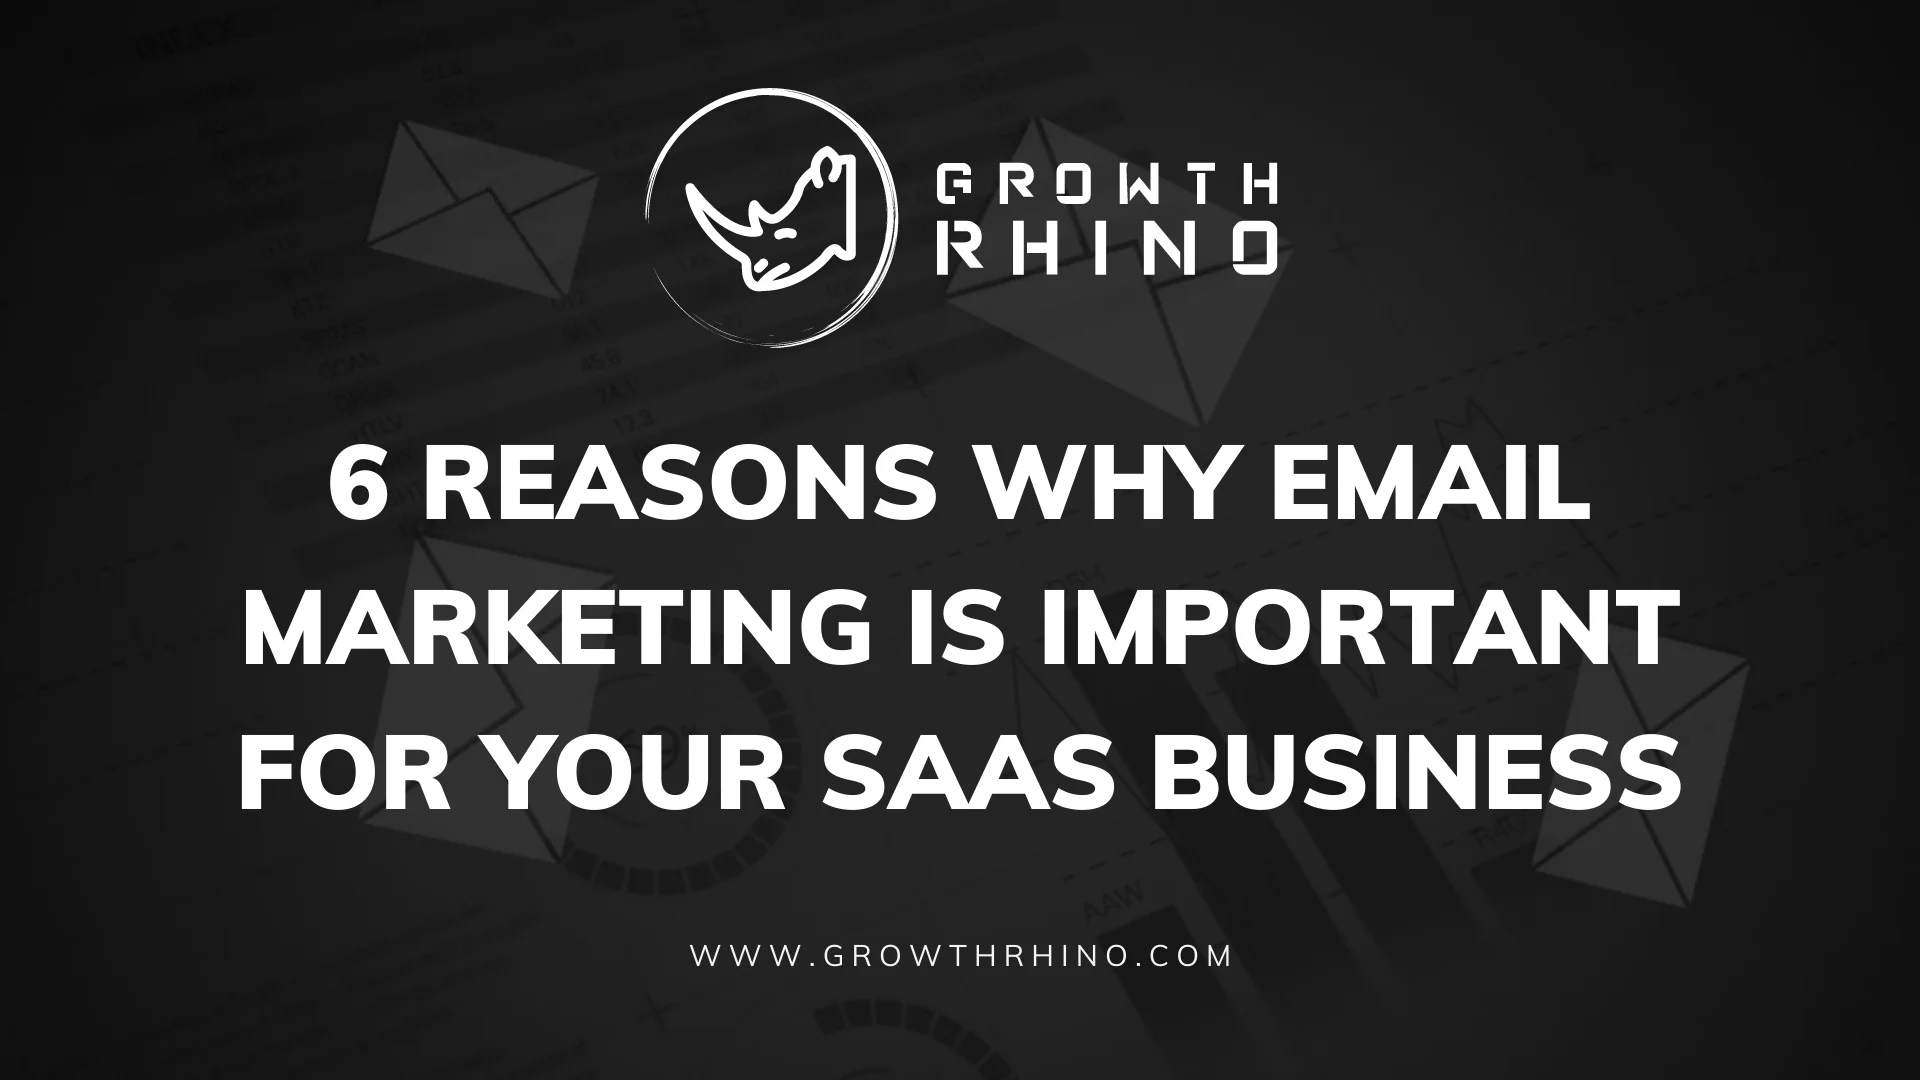 6 Reasons why Email Marketing is Important for your SaaS Business